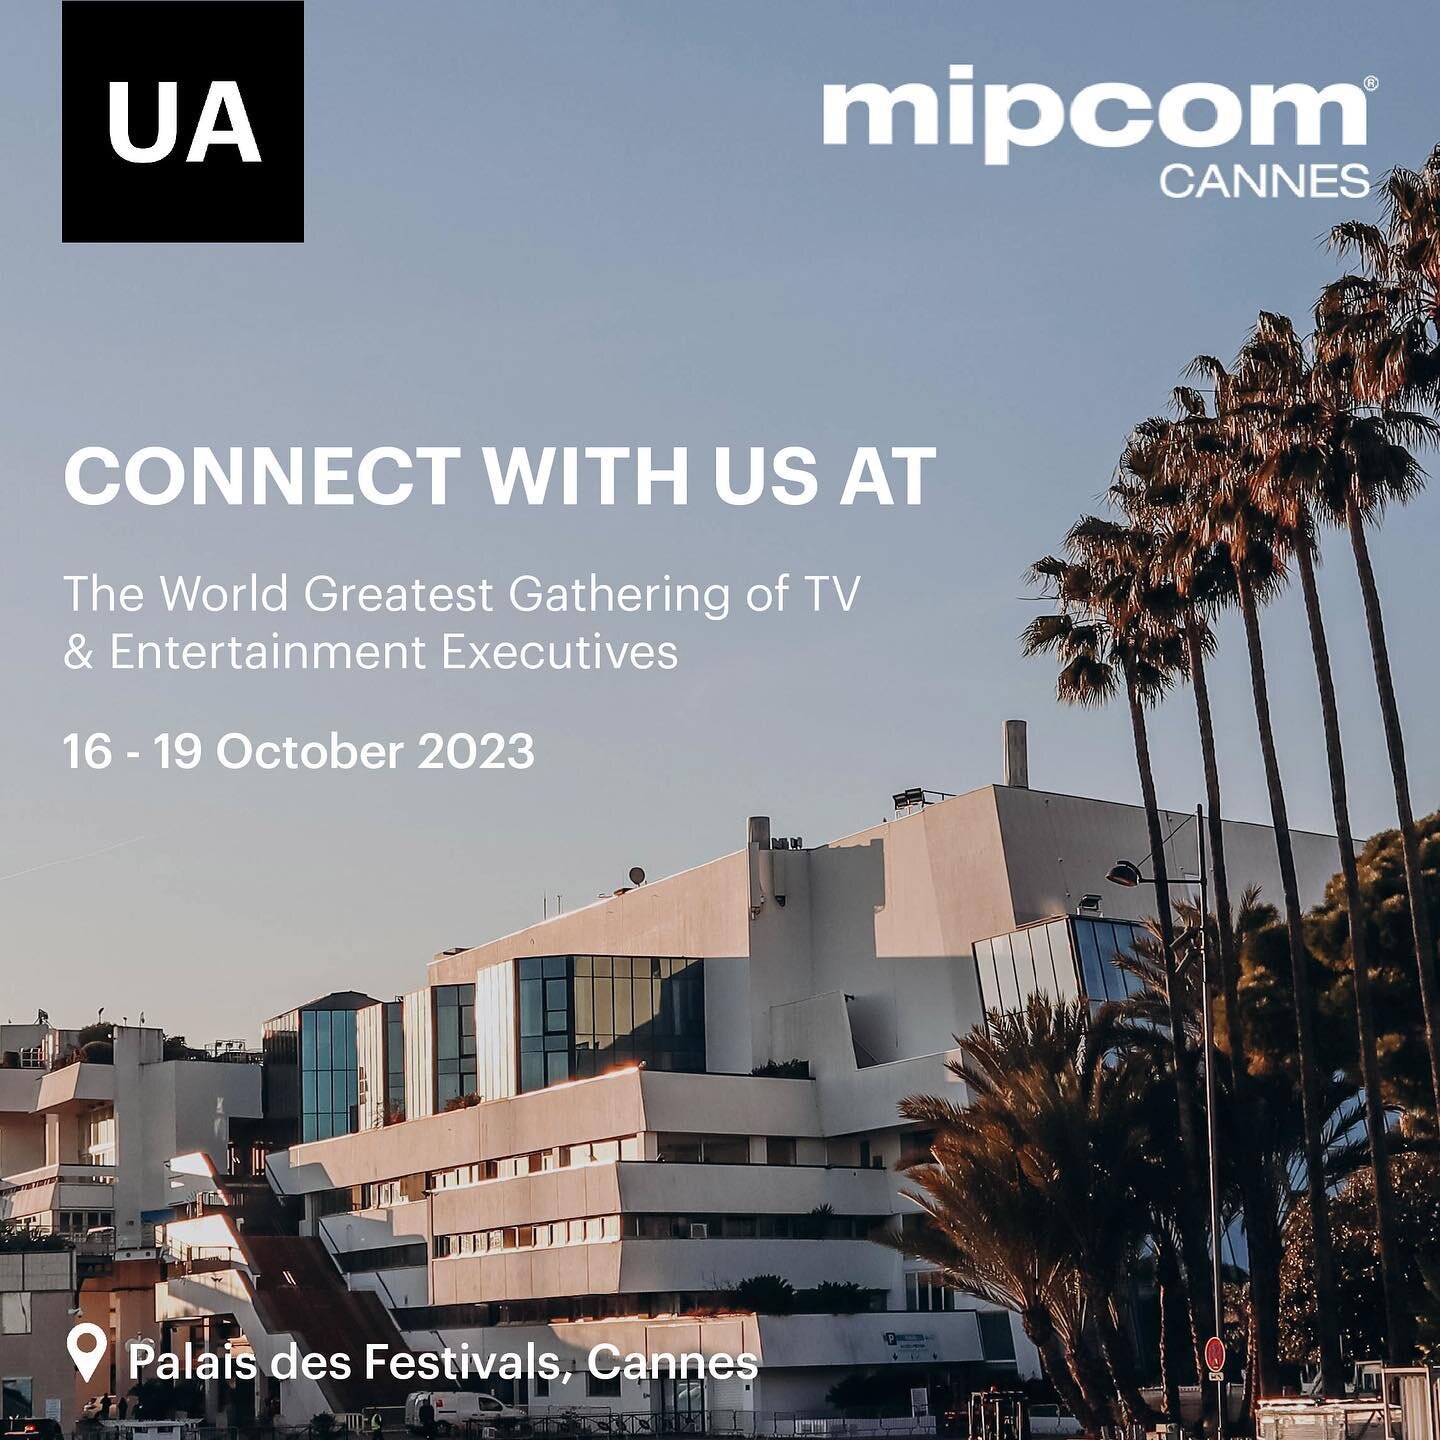 Cannes beckons as Universal Admedia attends #MIPCOM, a global market for entertainment content across all platforms. We're keenly anticipating discussions on the evolution of global entertainment content and the opportunities it presents. We have man